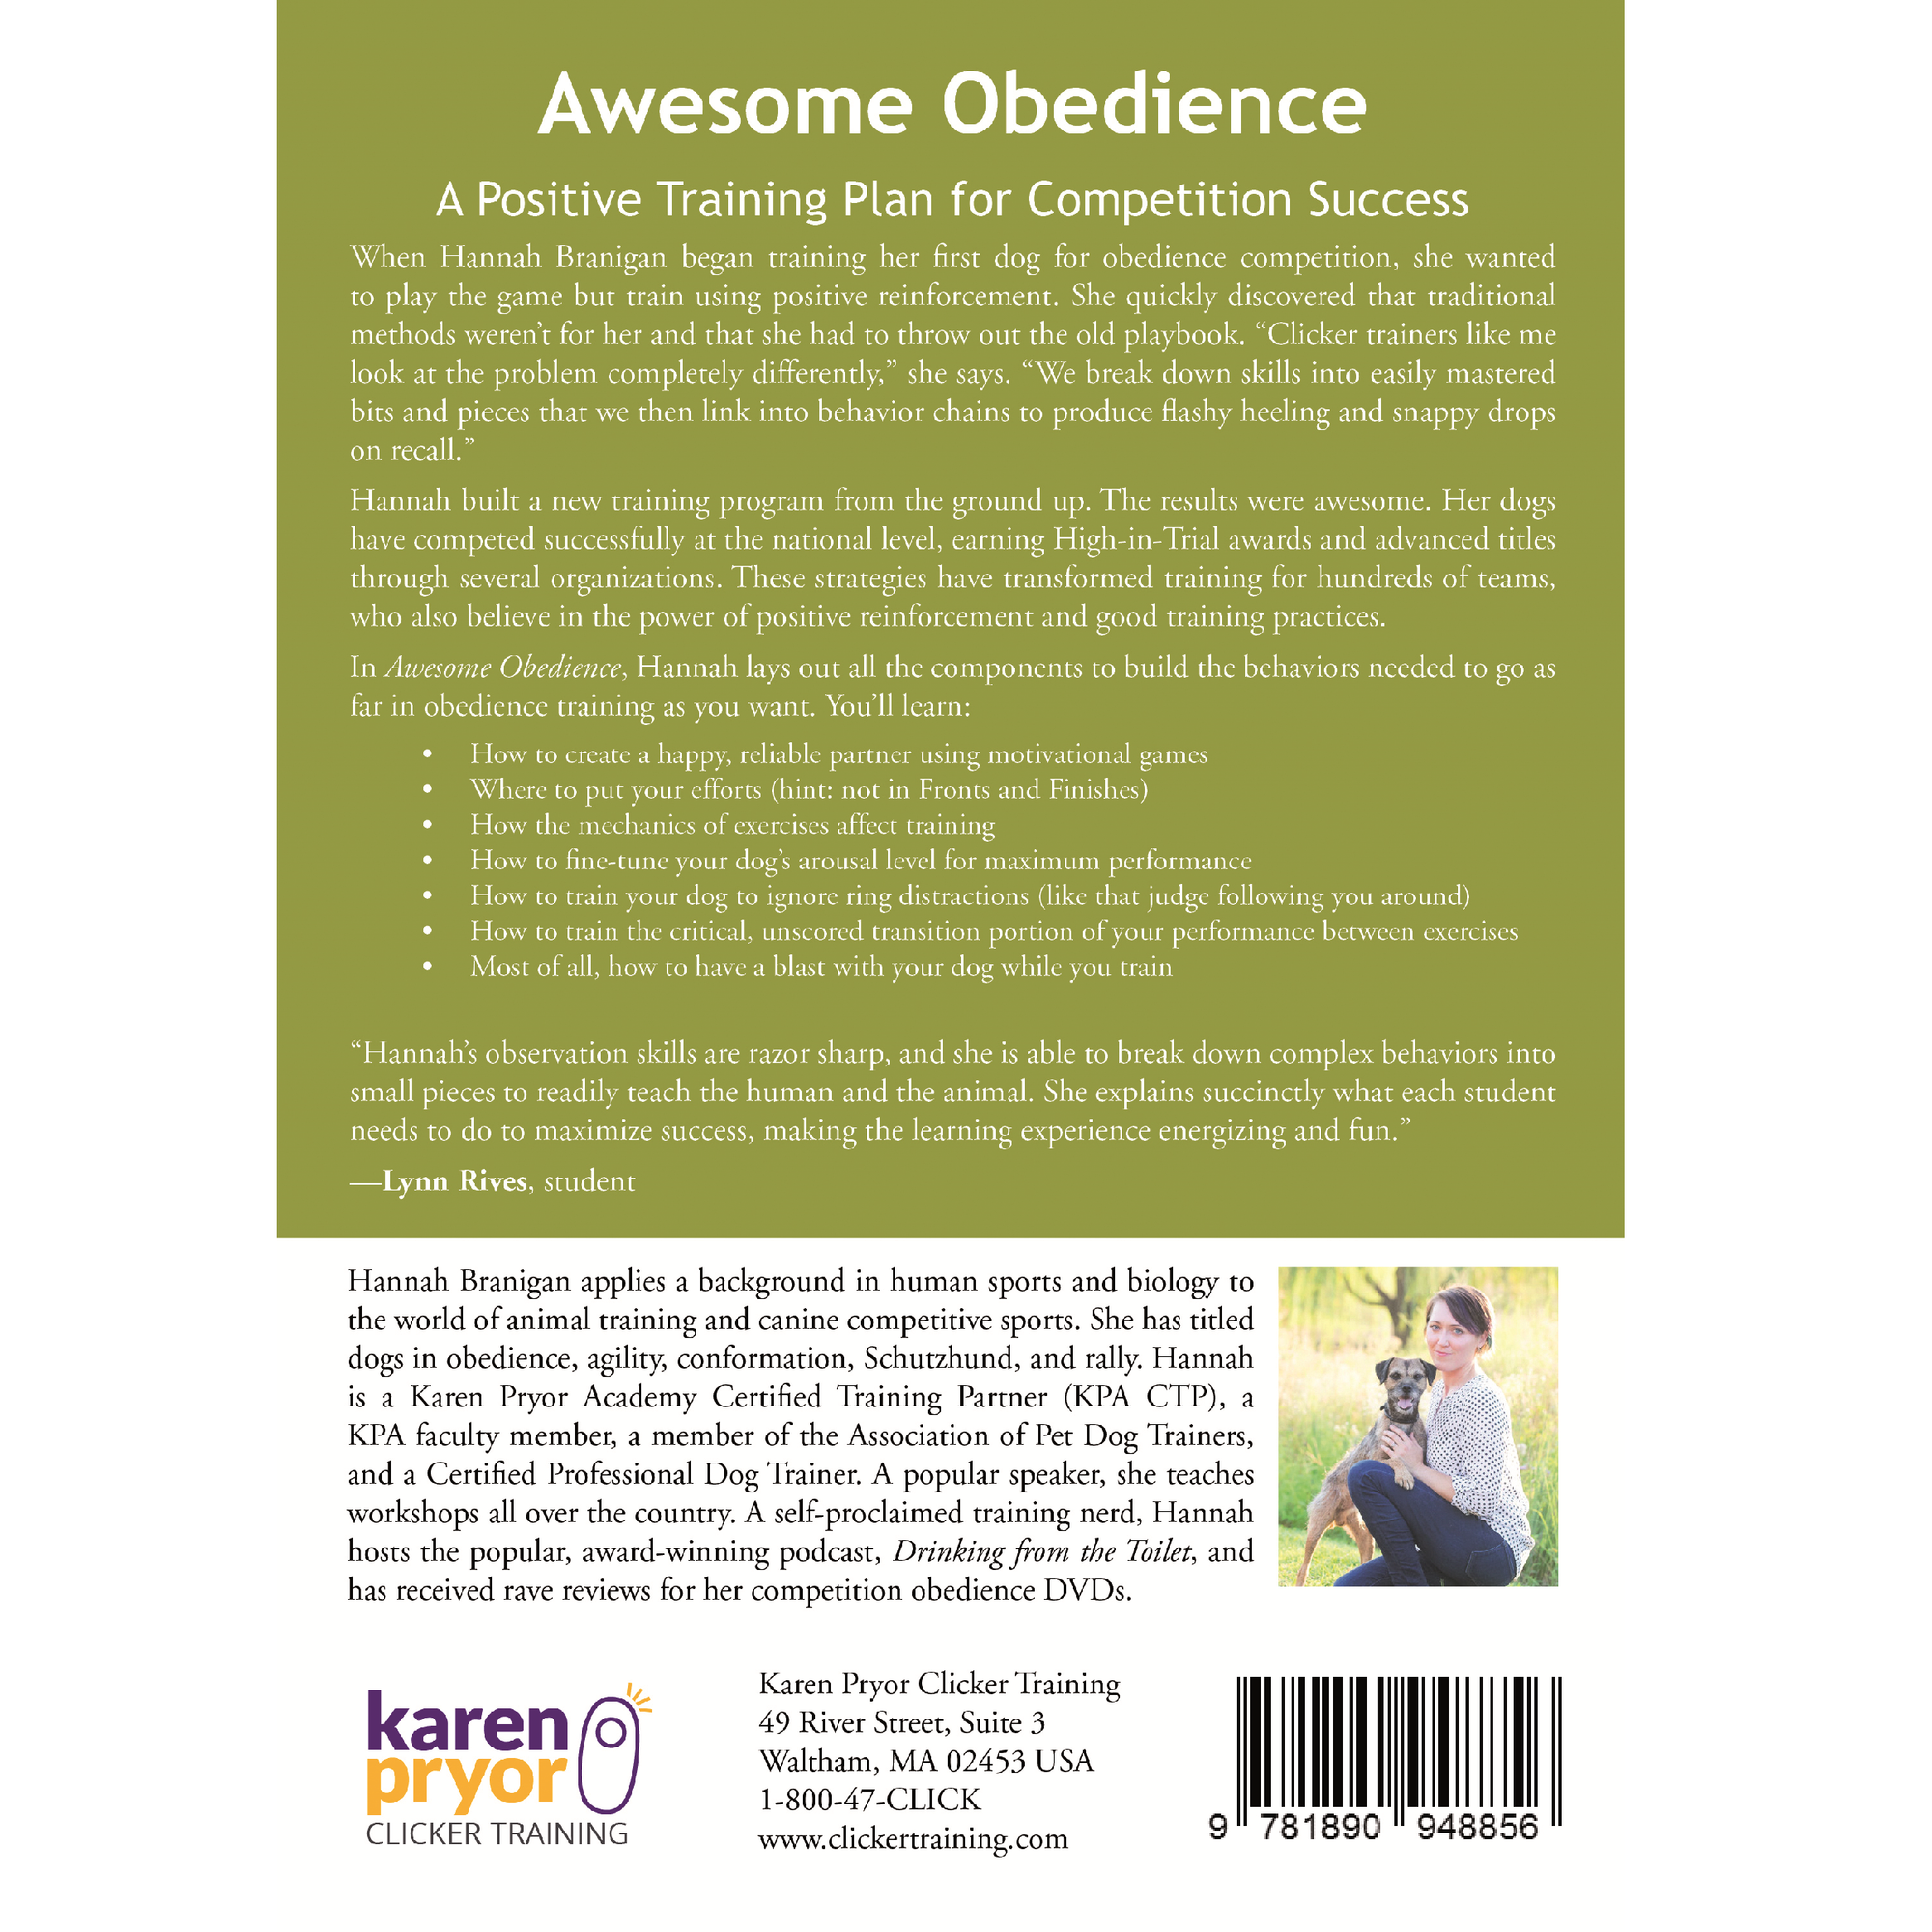 Awesome Obedience: A Positive Training Plan for Competition Success by Hannah Branigan